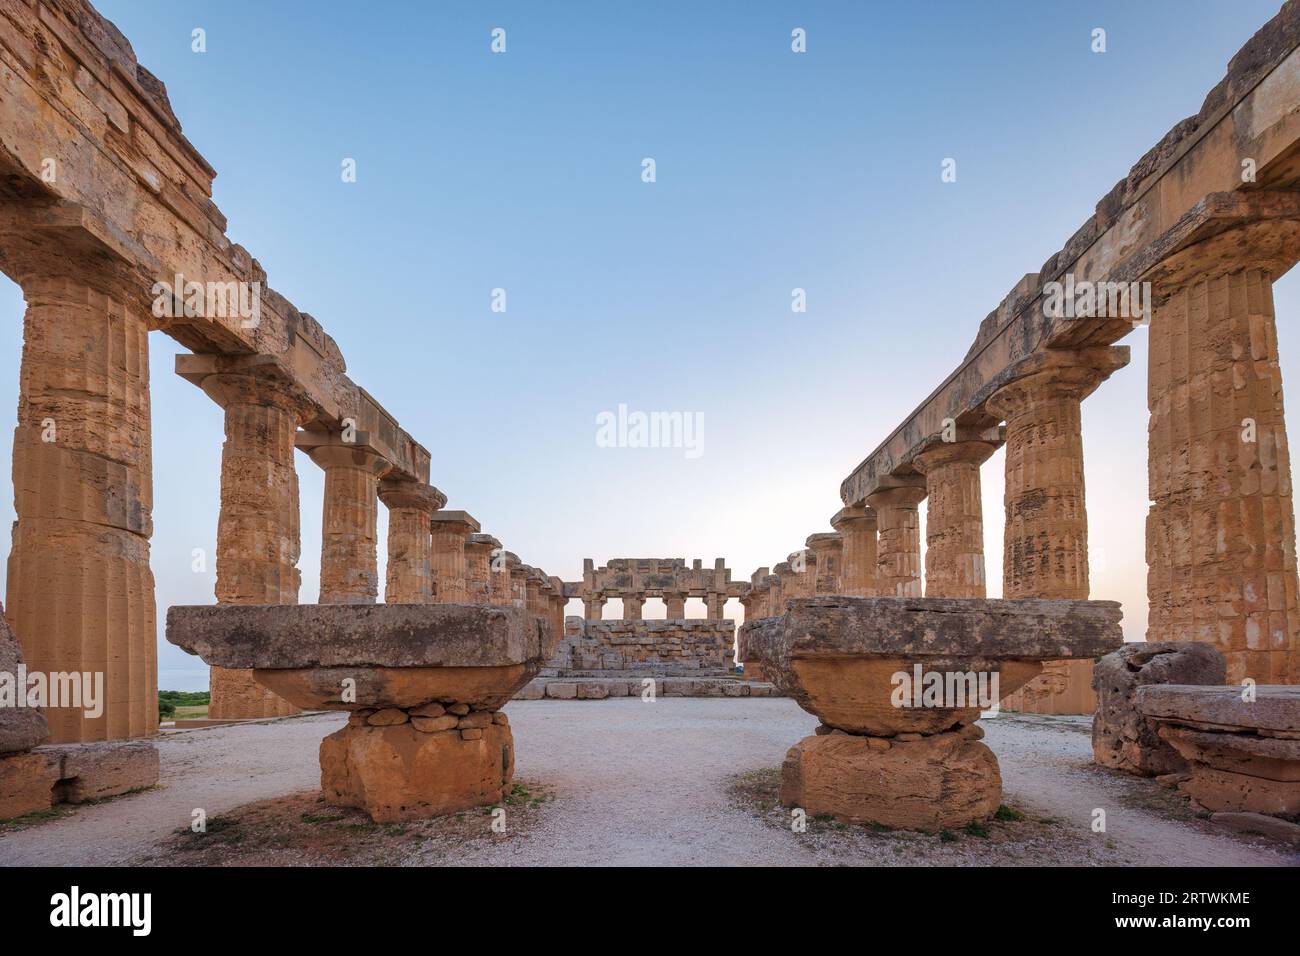 Temple of Hera in Selinunte at sunset. The archaeological site at Sicily, Italy, Europe. Stock Photo